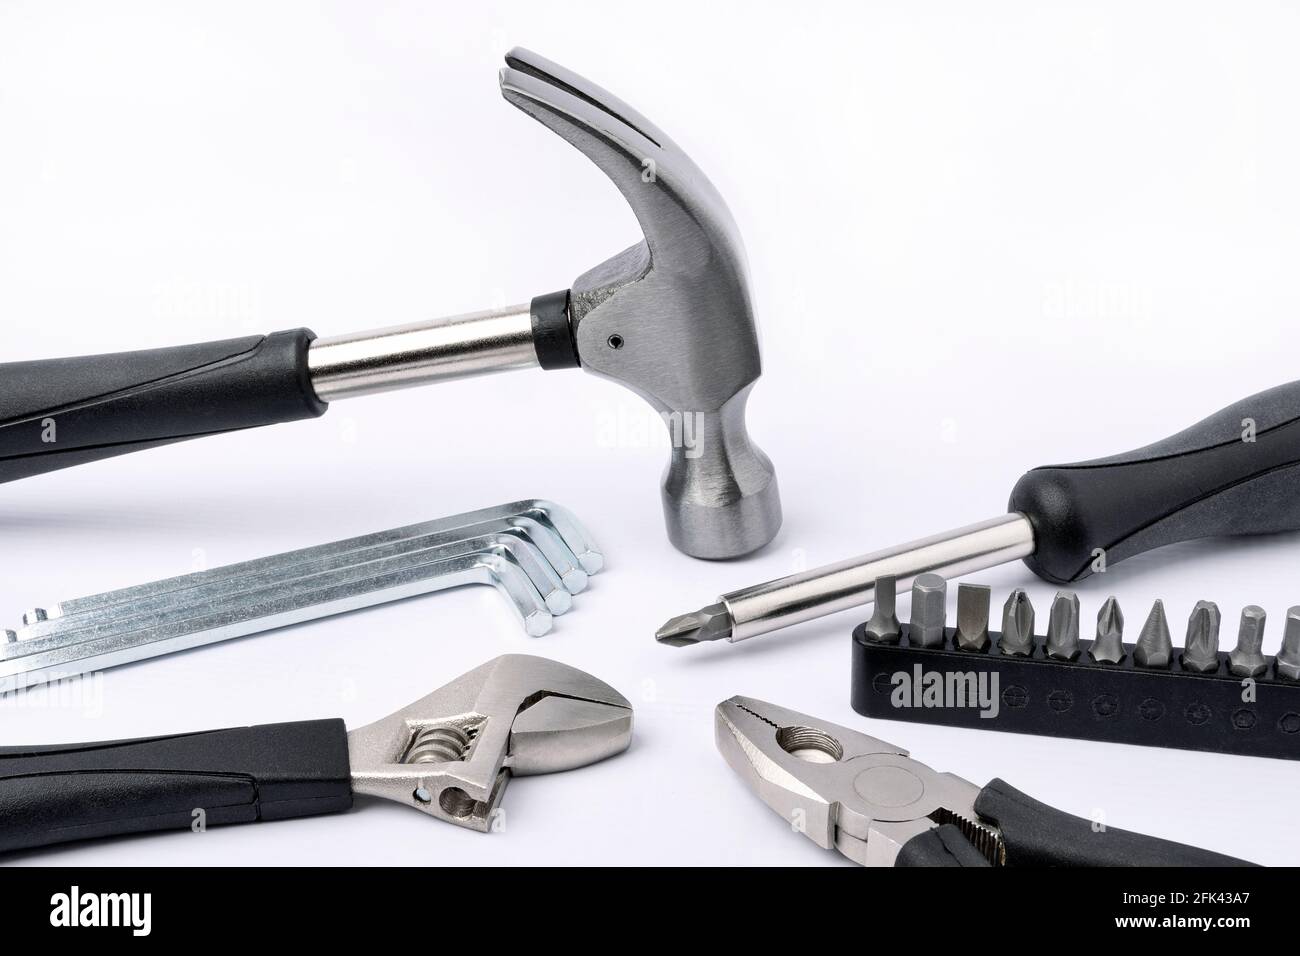 Set of metal working tools on white background. Stock Photo